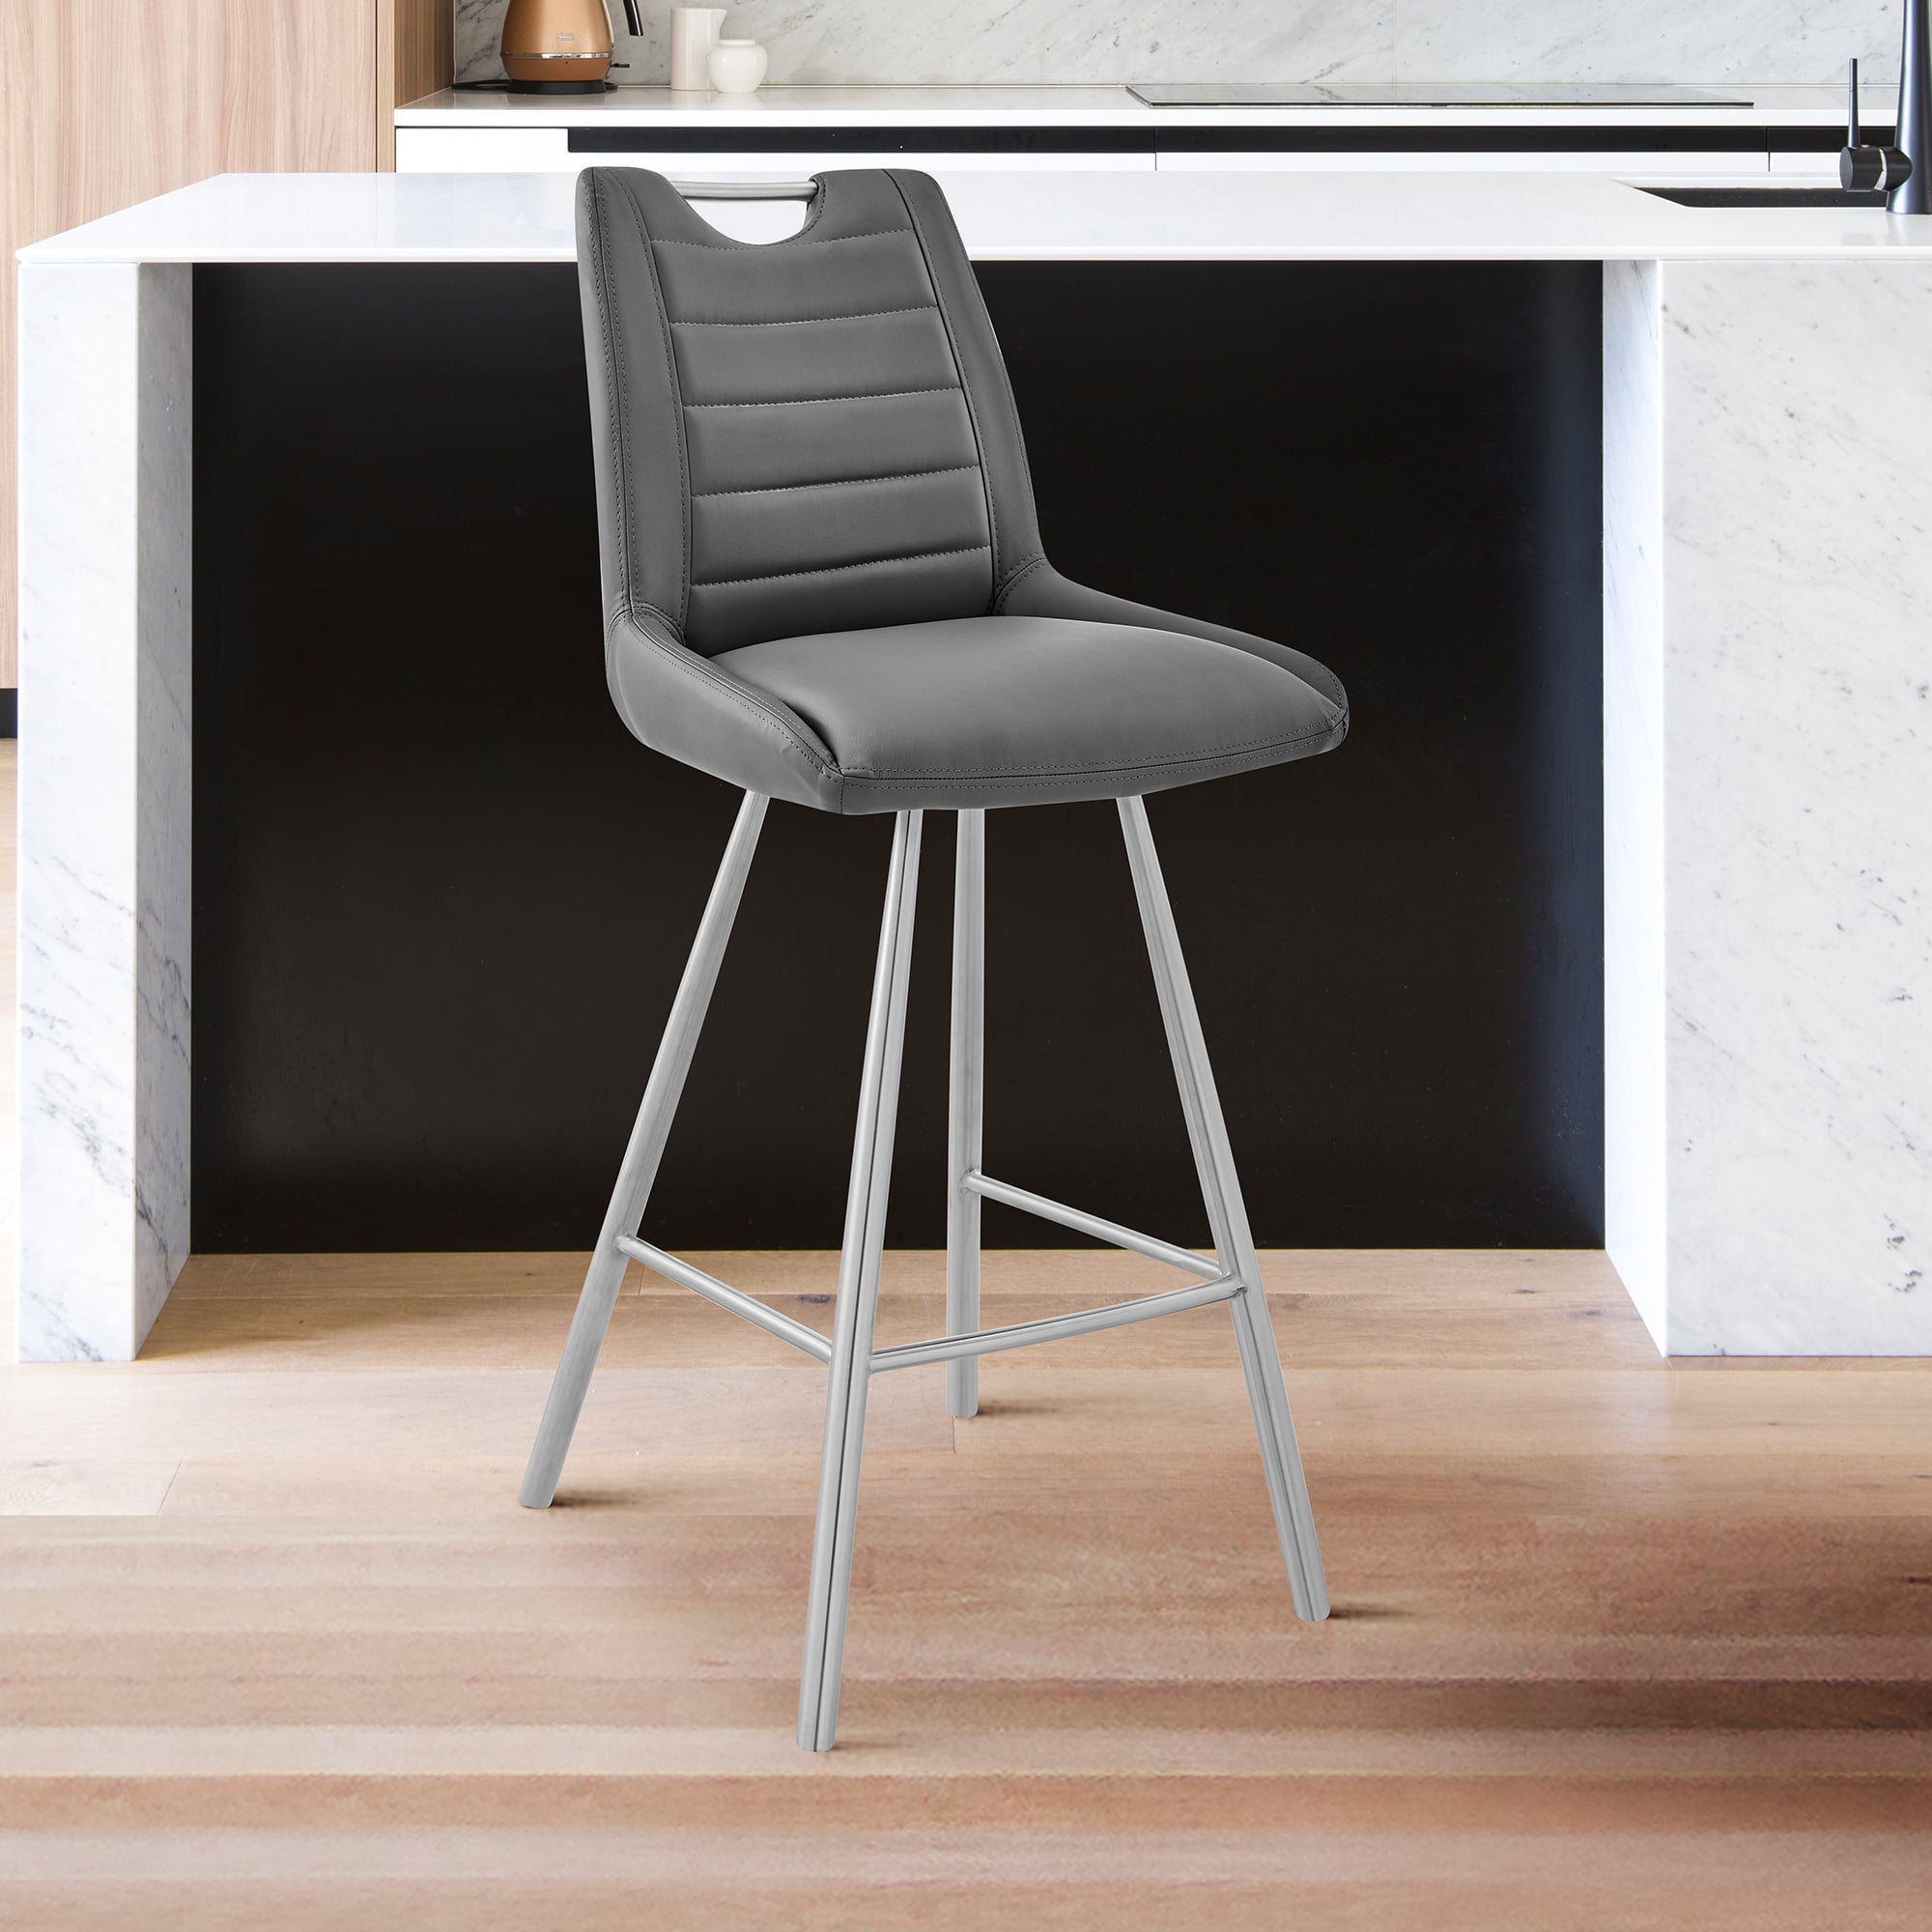 Picture of Armen Living LCAZBAGR30 30 in. Arizona Bar Height Bar Stool in Charcoal Faux Leather & Brushed Stainless Steel Finish